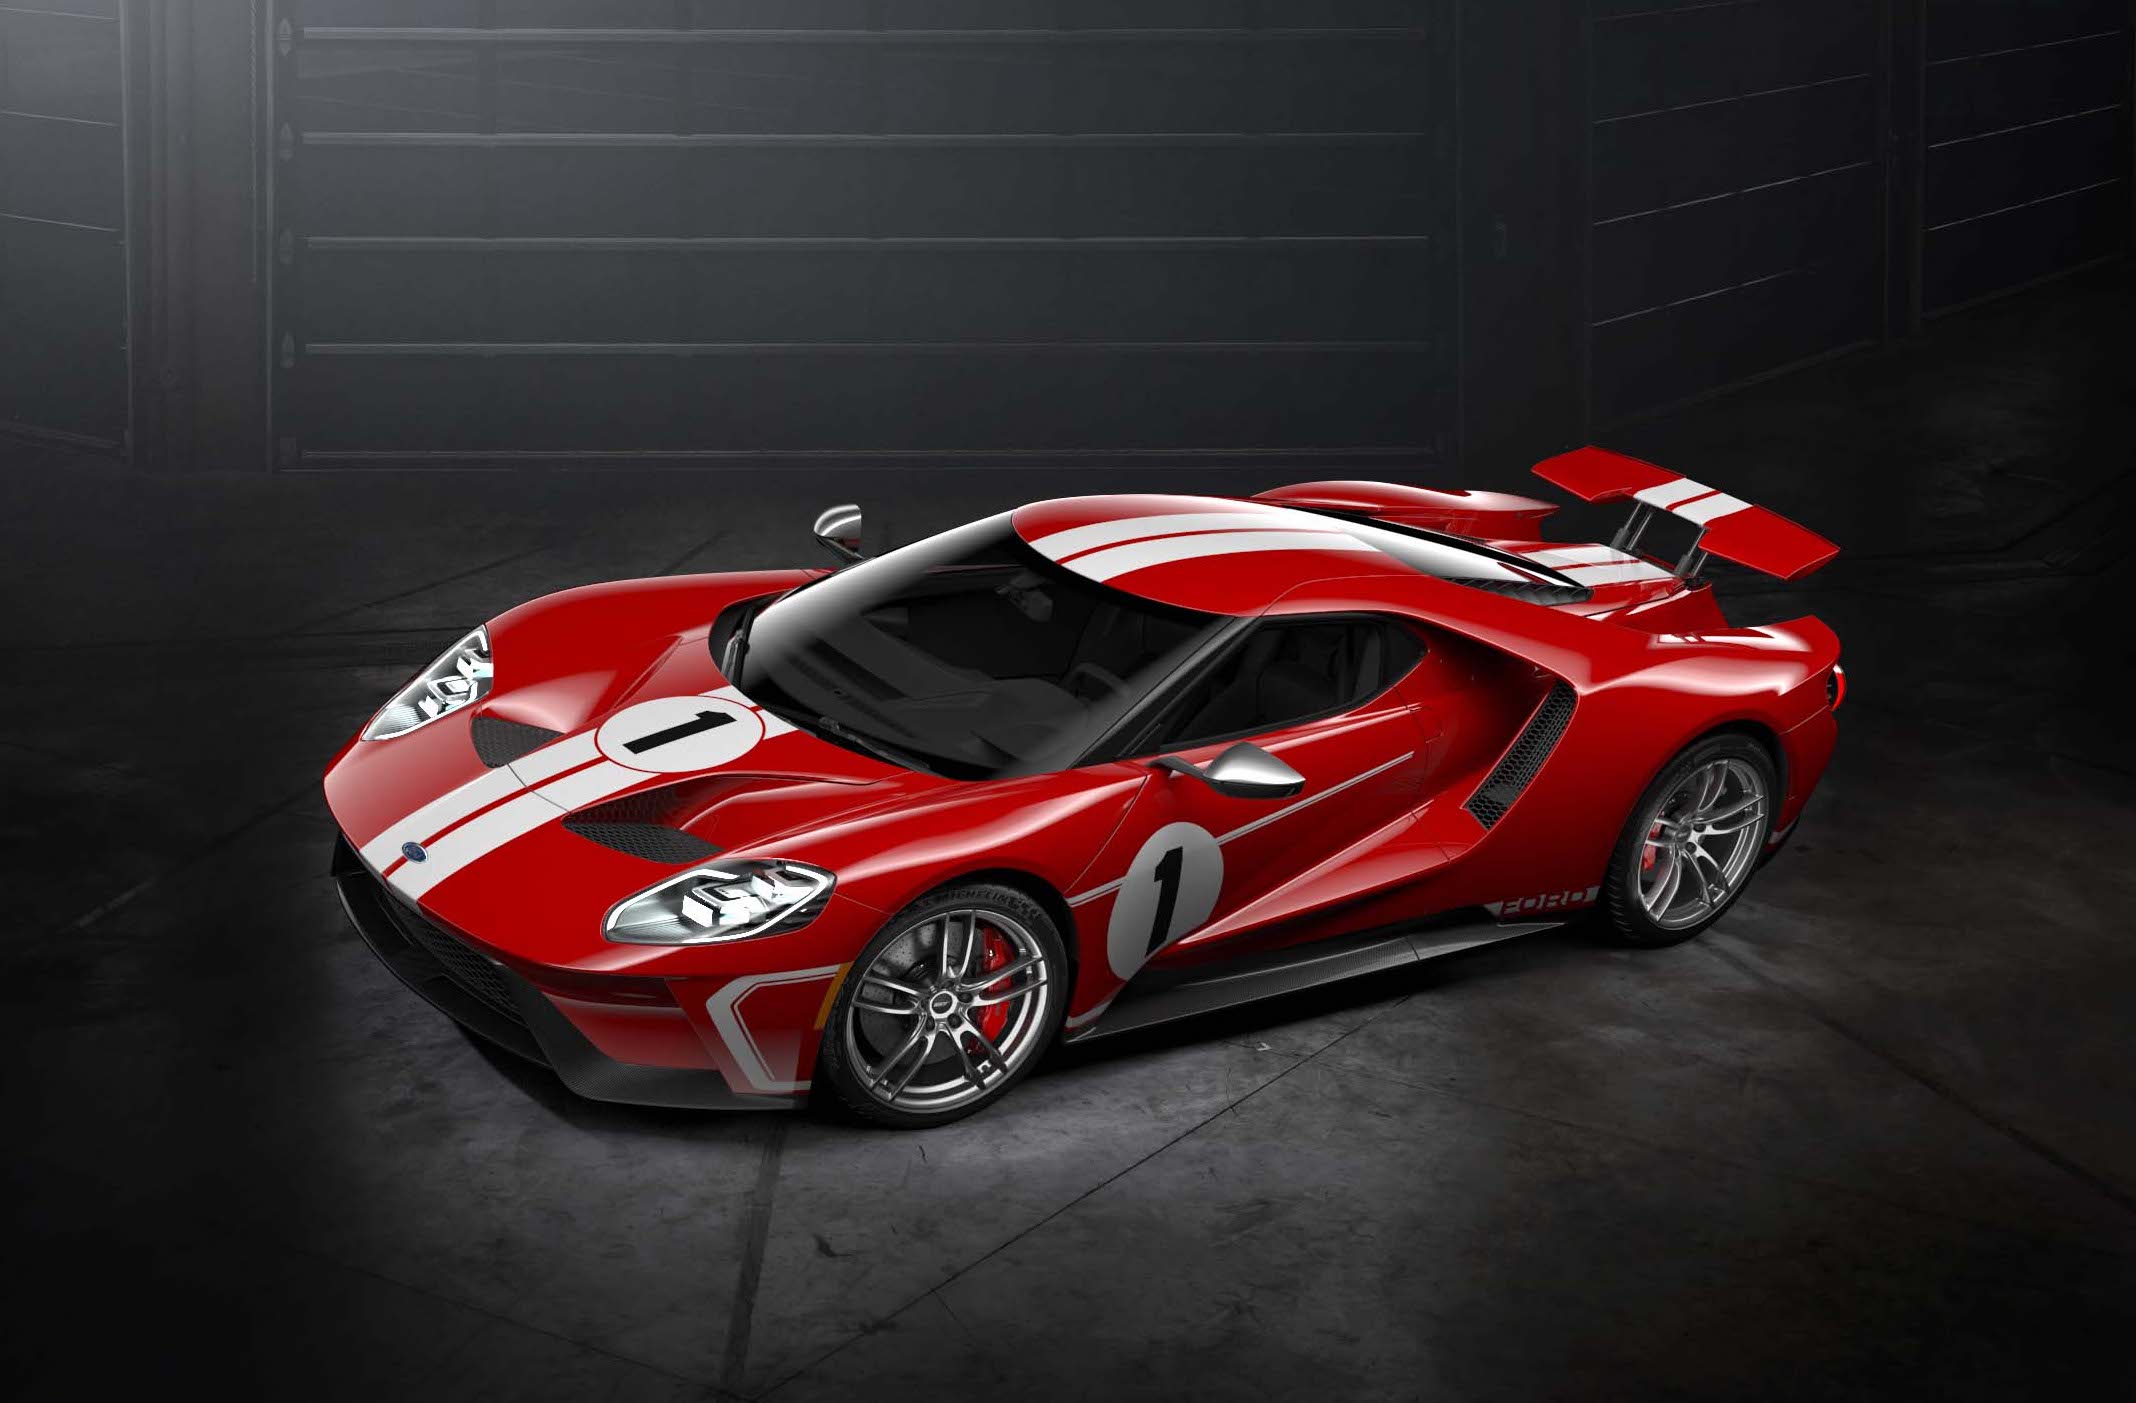 Ford GT application process to reopen late this year